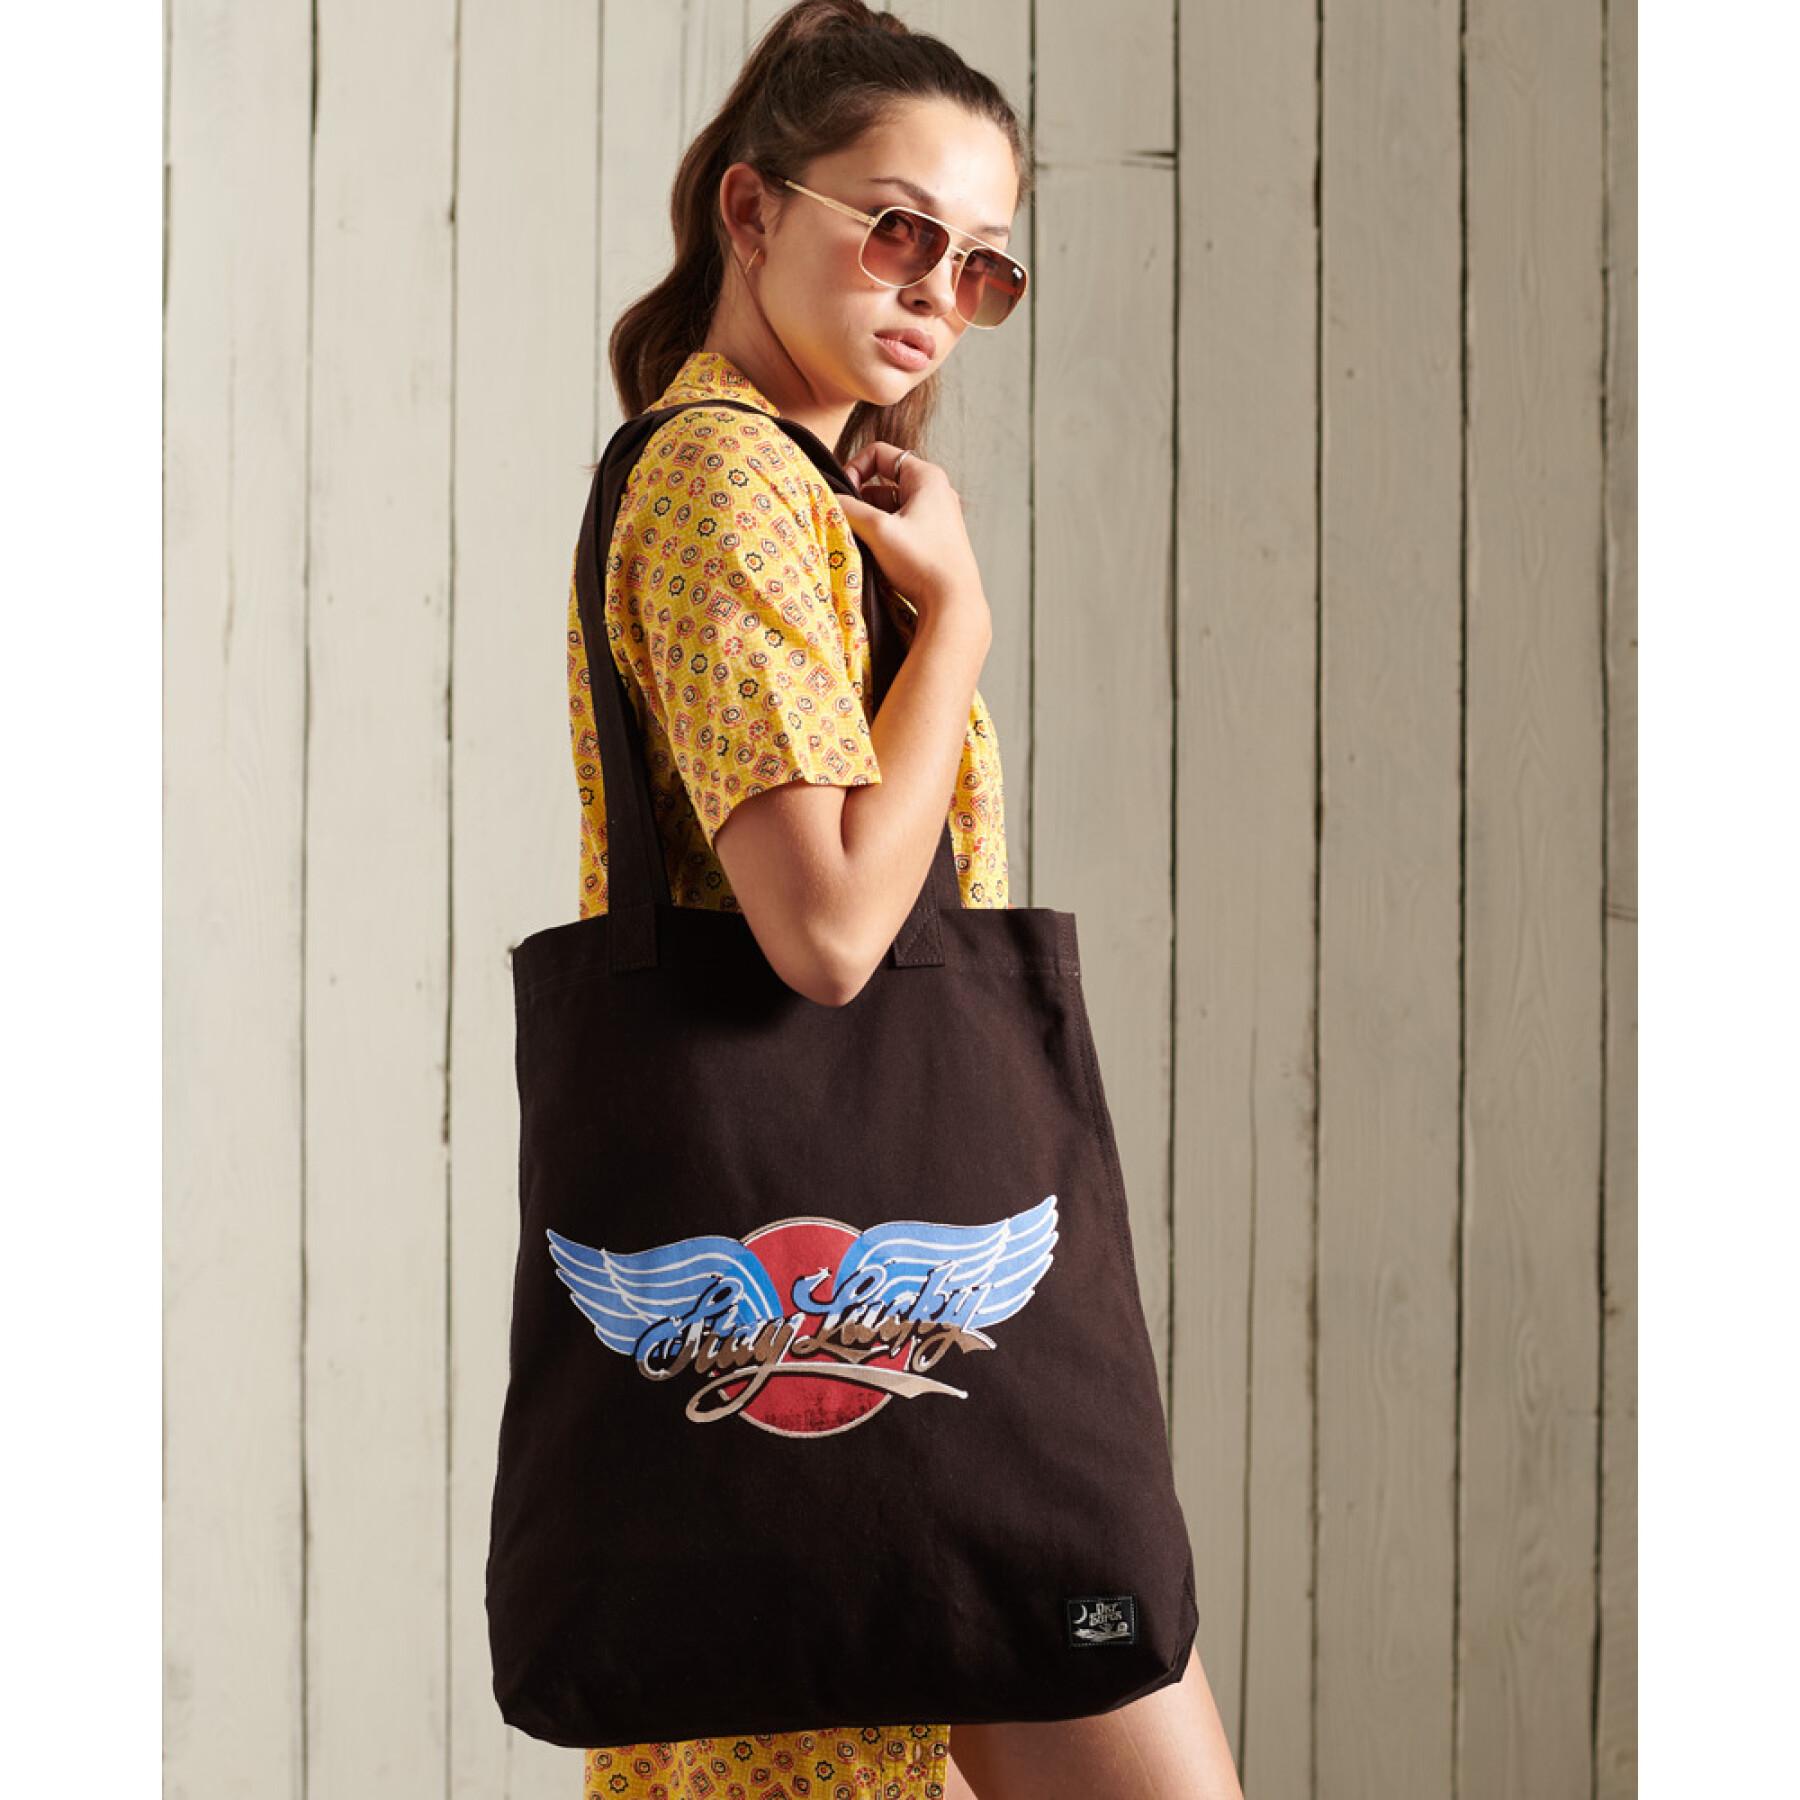 Tote bag with woman's motif Superdry